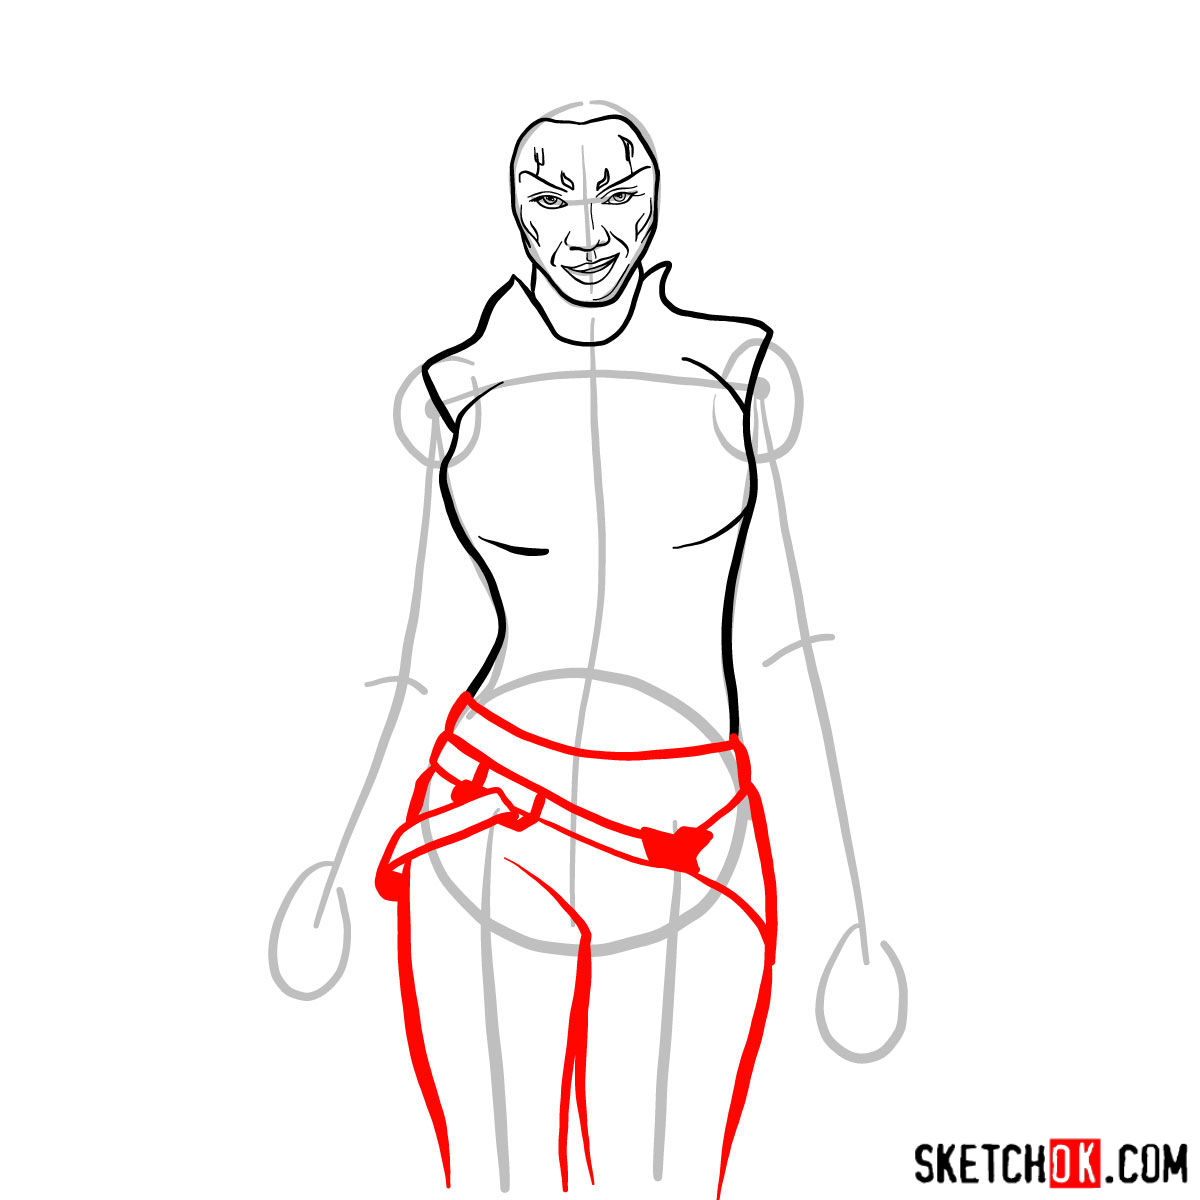 How to draw Gamora from Guardians of the Galaxy - step 07